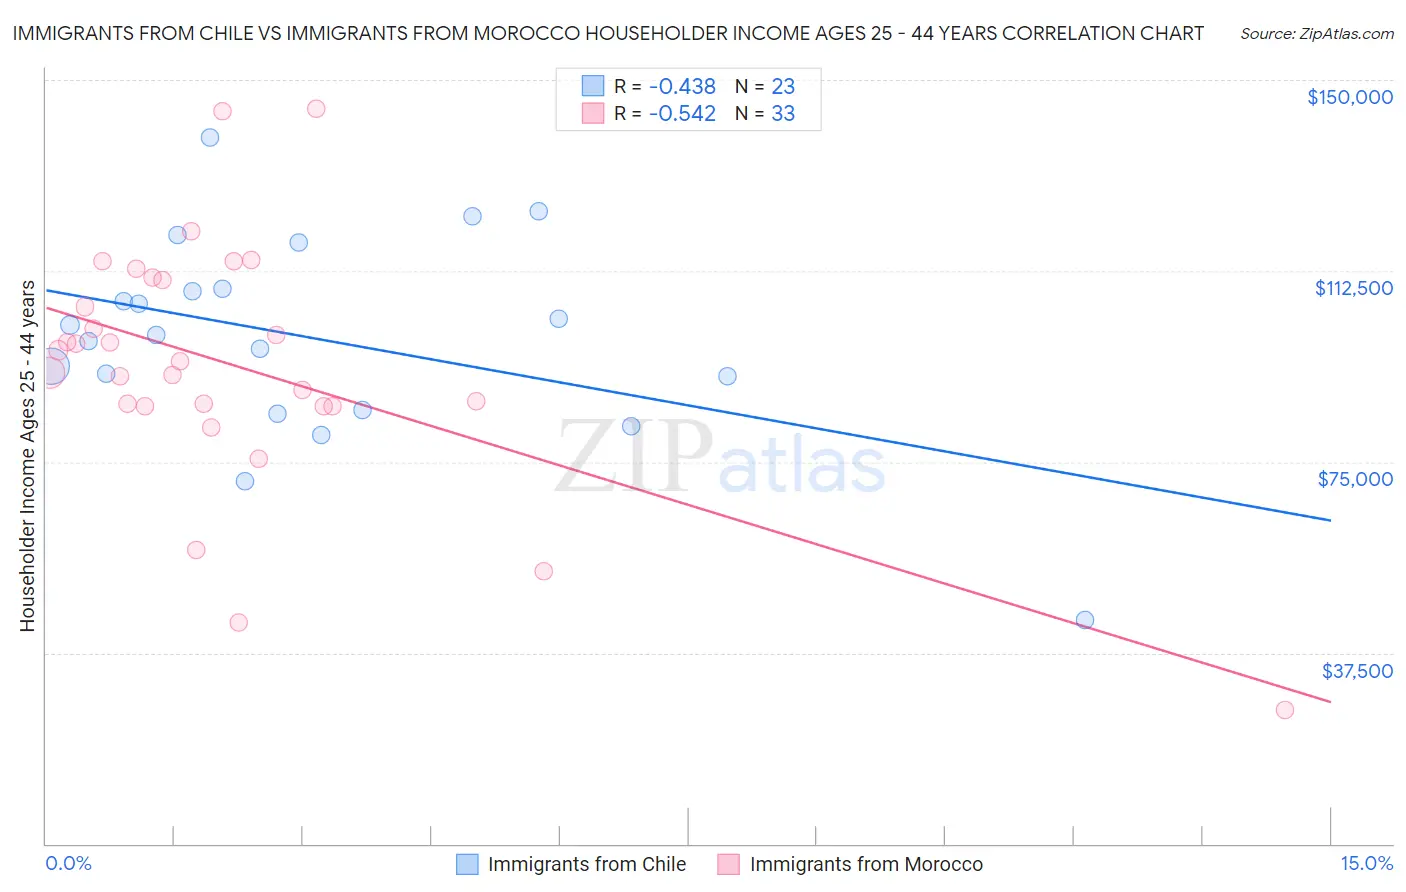 Immigrants from Chile vs Immigrants from Morocco Householder Income Ages 25 - 44 years